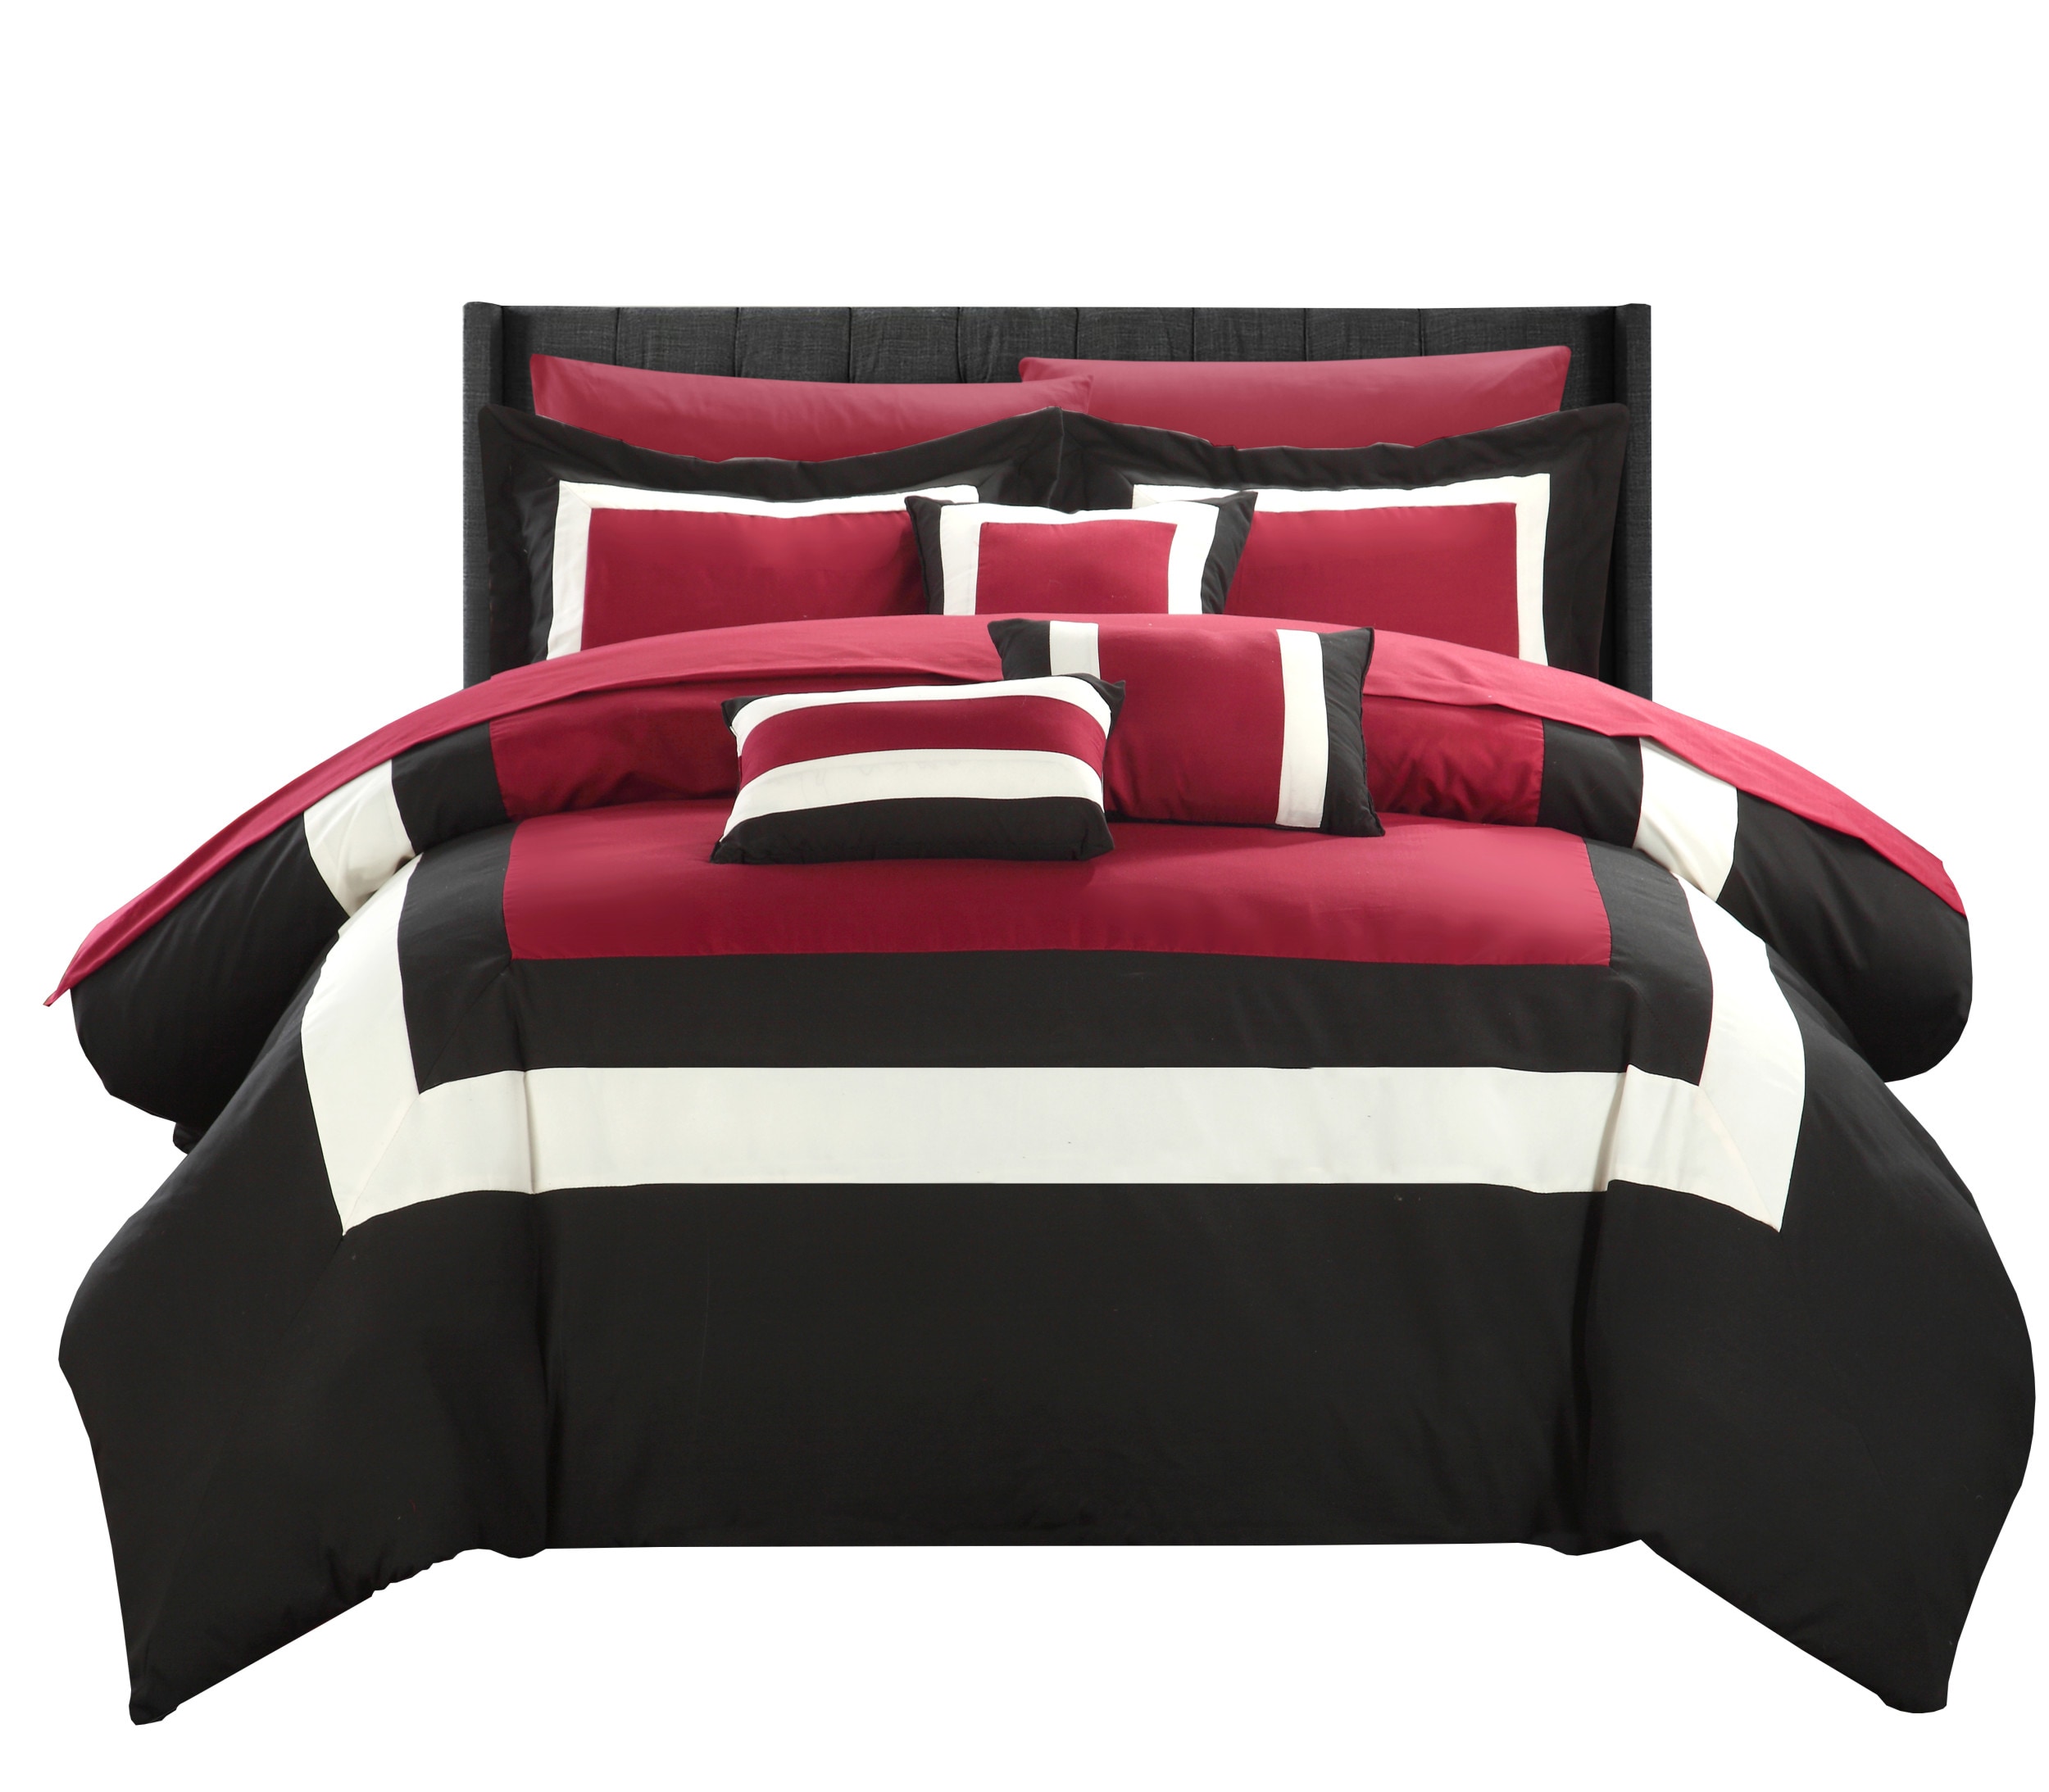 Chic Home Design Duke 10-Piece Red Queen Comforter Set in the